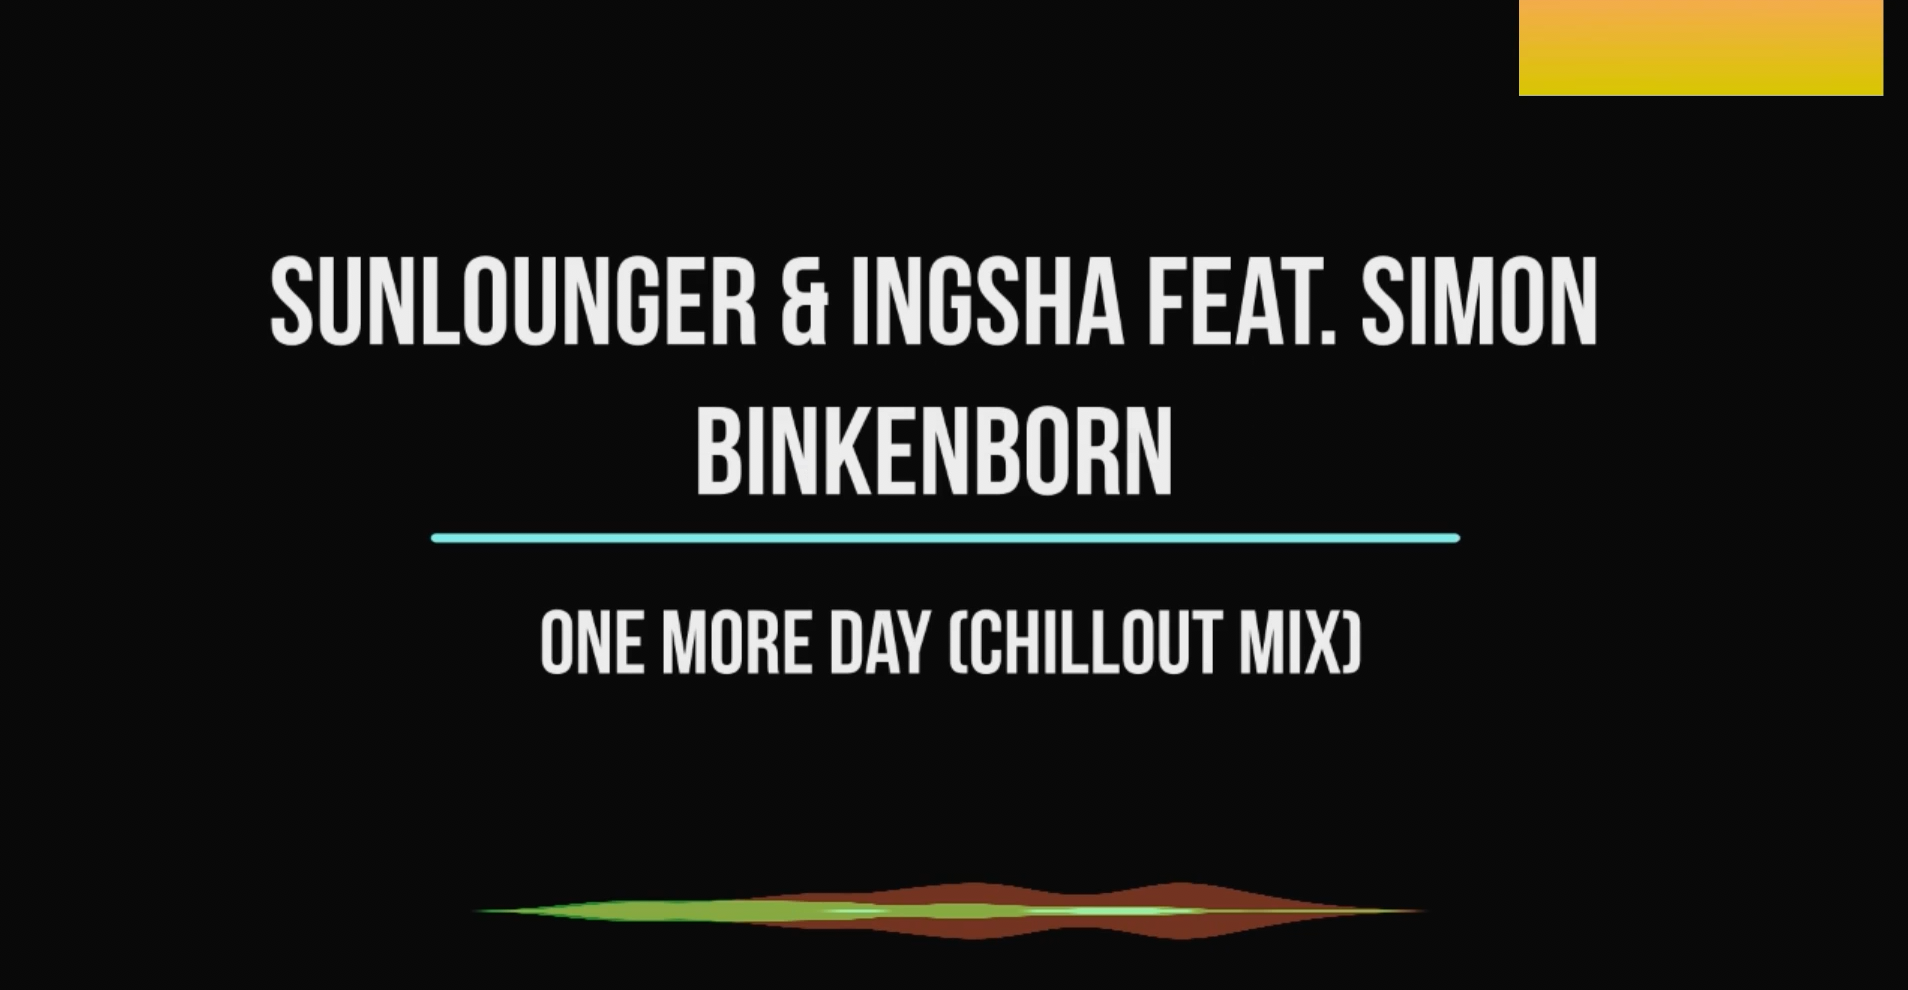 One More Day (Chillout Mix)